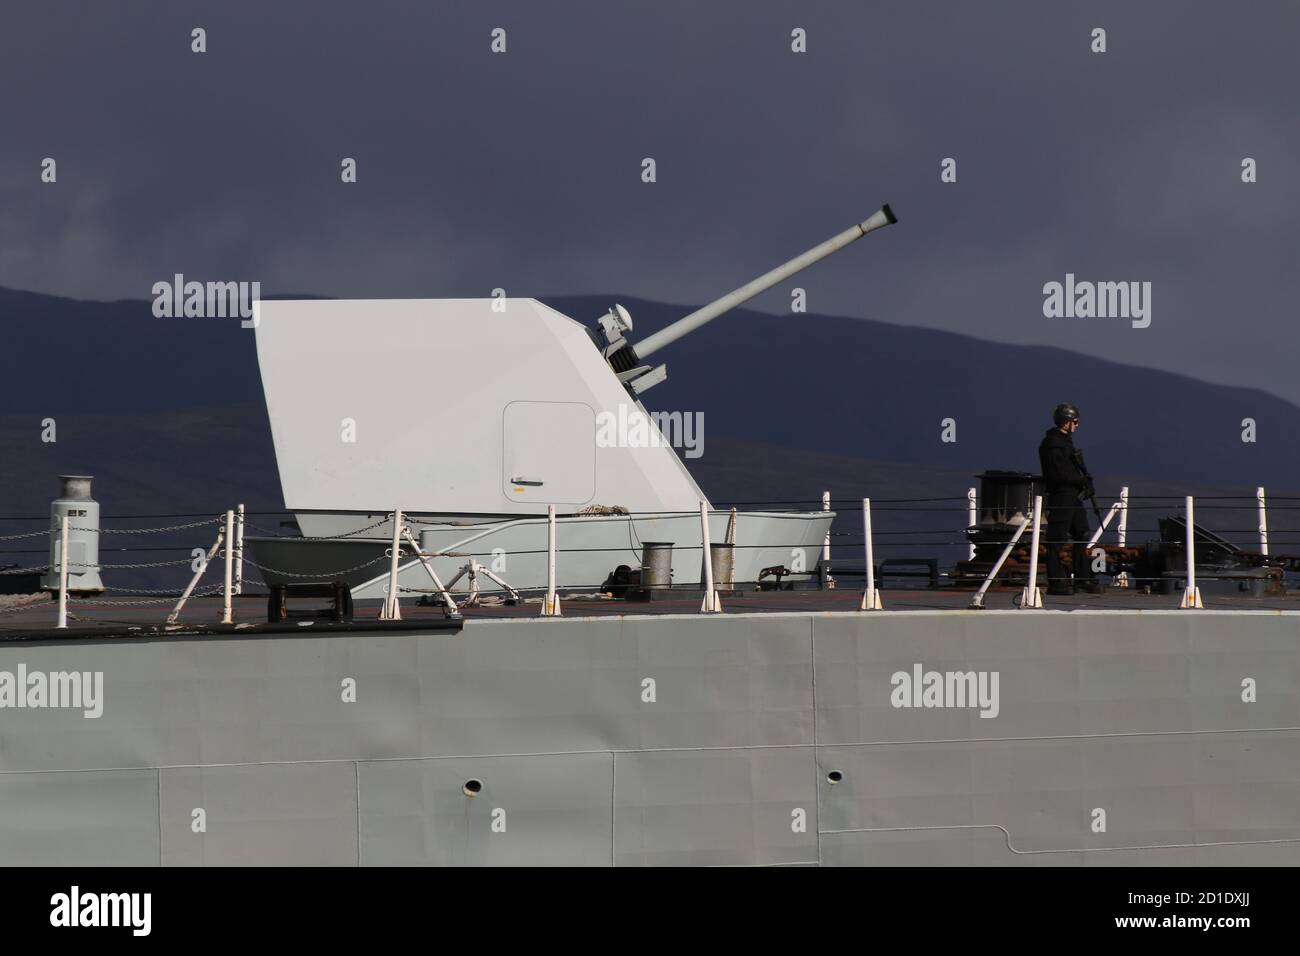 A Mark 3 Bofors 57mm naval gun, used on HMCS Ville de Quebec (FFH-332), a Halifax-class (or City-class) frigate operated by the Royal Canadian Navy, photographed as the vessel passed Greenock on her arrival for Exercise Joint Warrior. Note the armed sailor patrolling the deck. Stock Photo